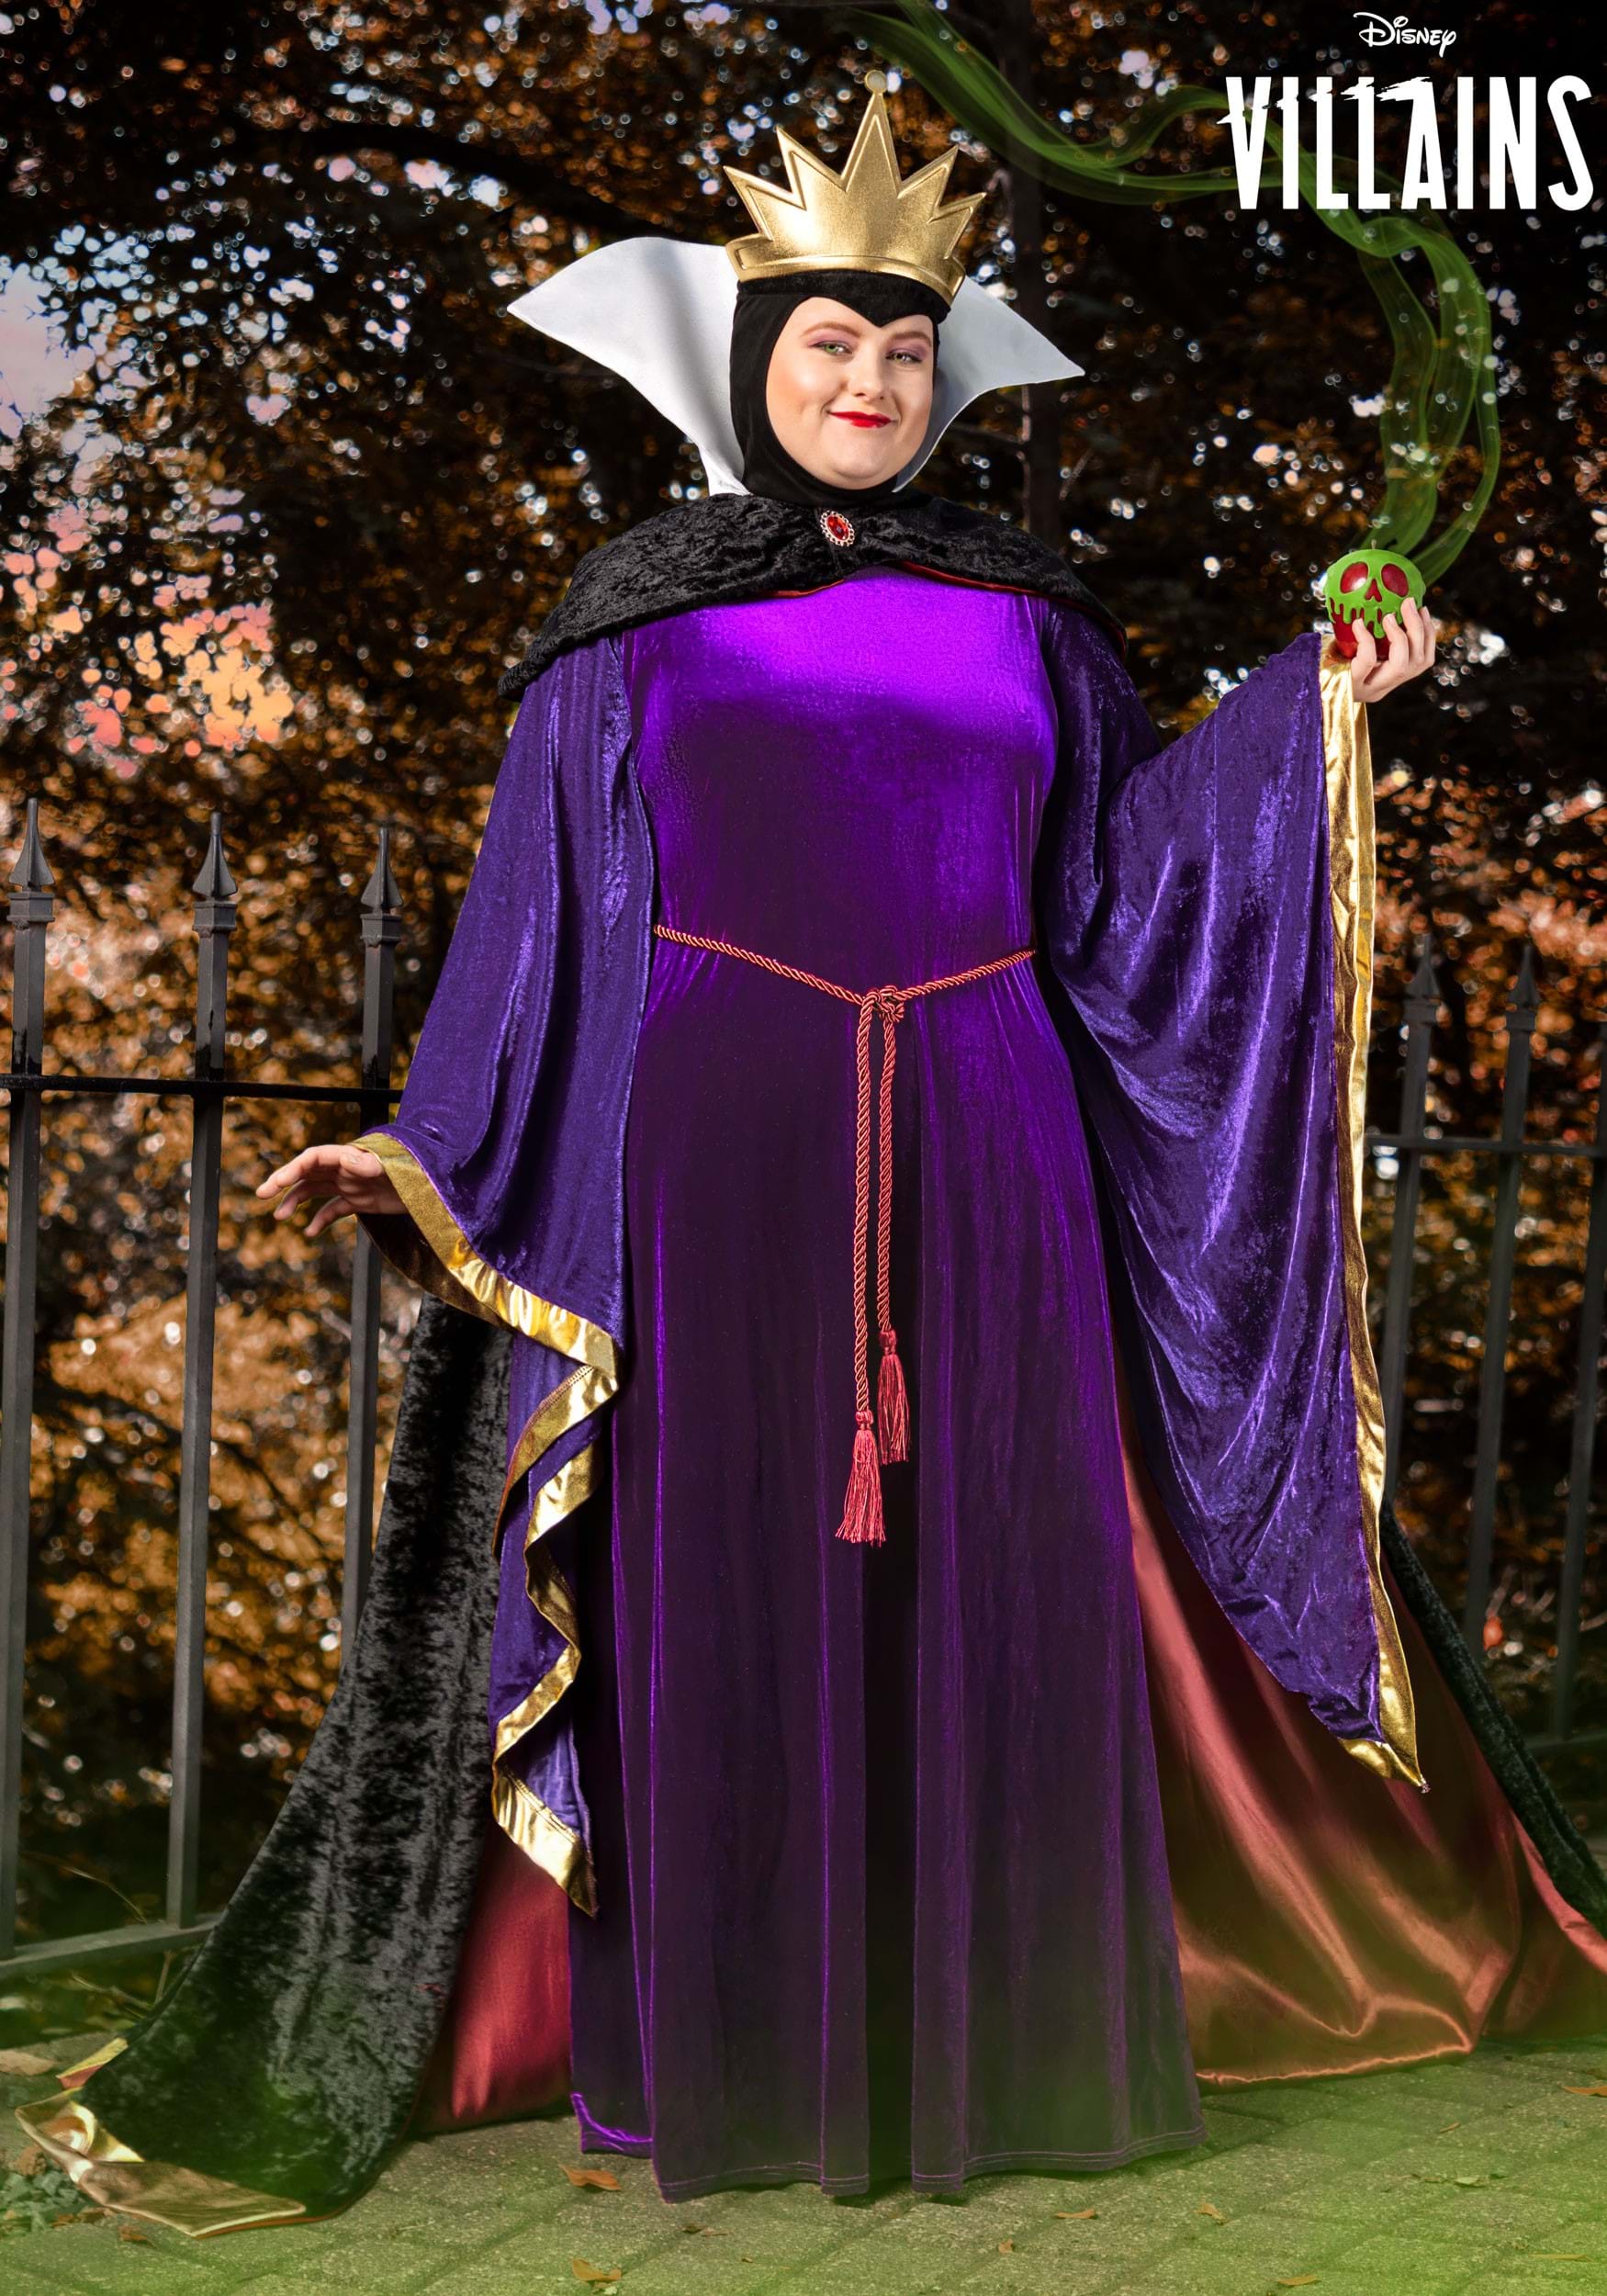 https://images.halloweencostumes.com/products/75349/1-1/womens-disney-snow-white-plus-size-evil-queen-costume-0.jpg